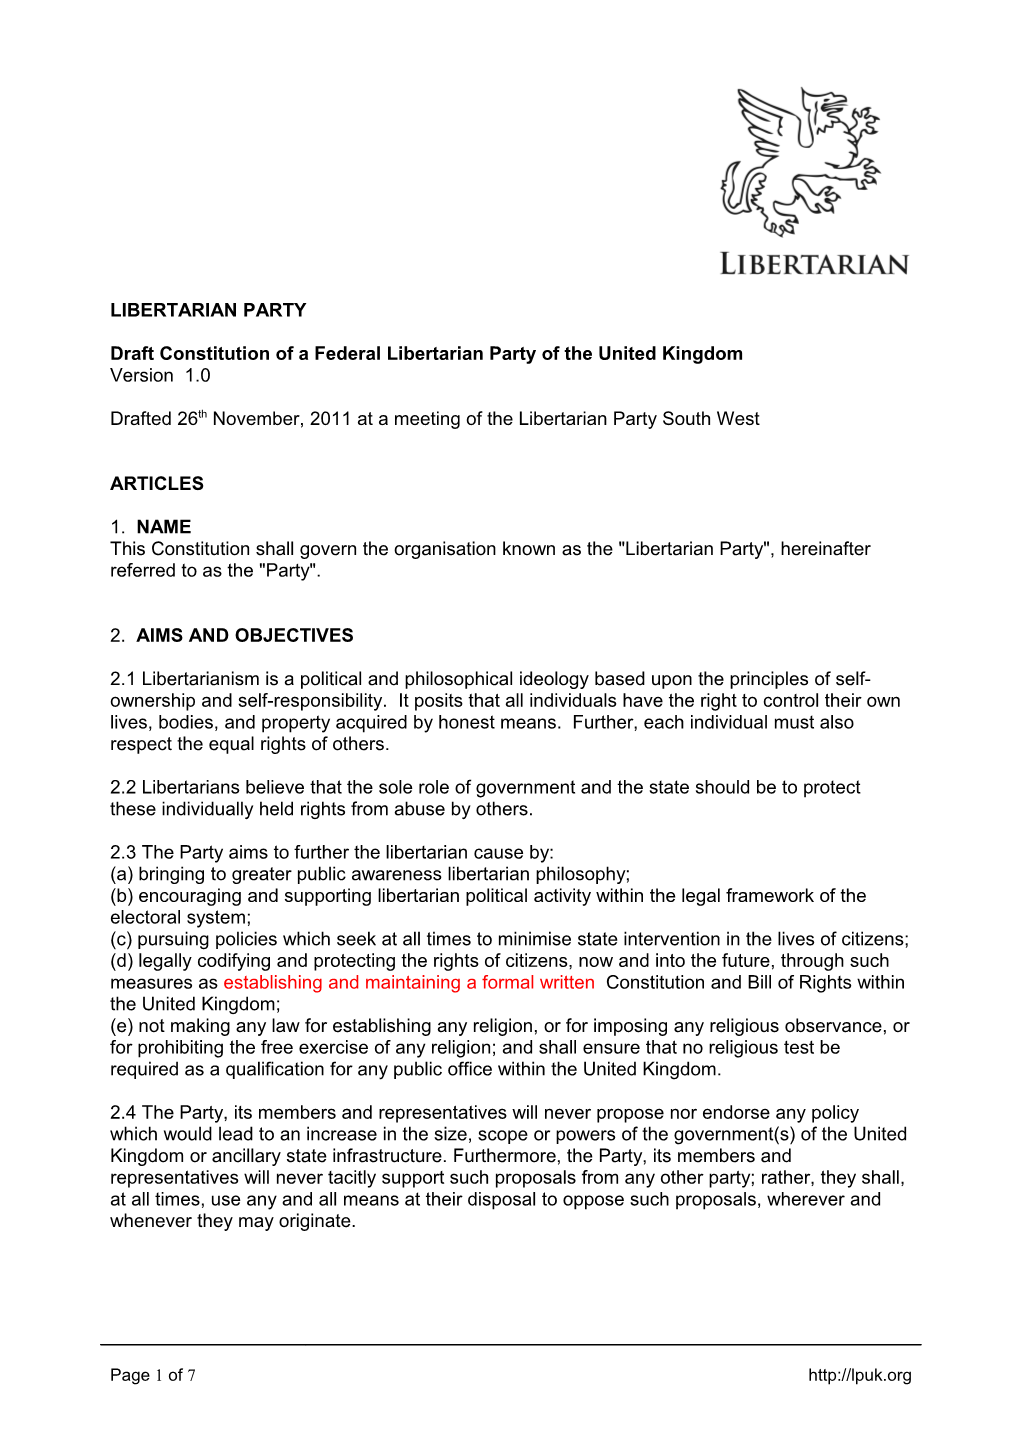 Draft Constitution of a Federal Libertarian Party of the United Kingdom